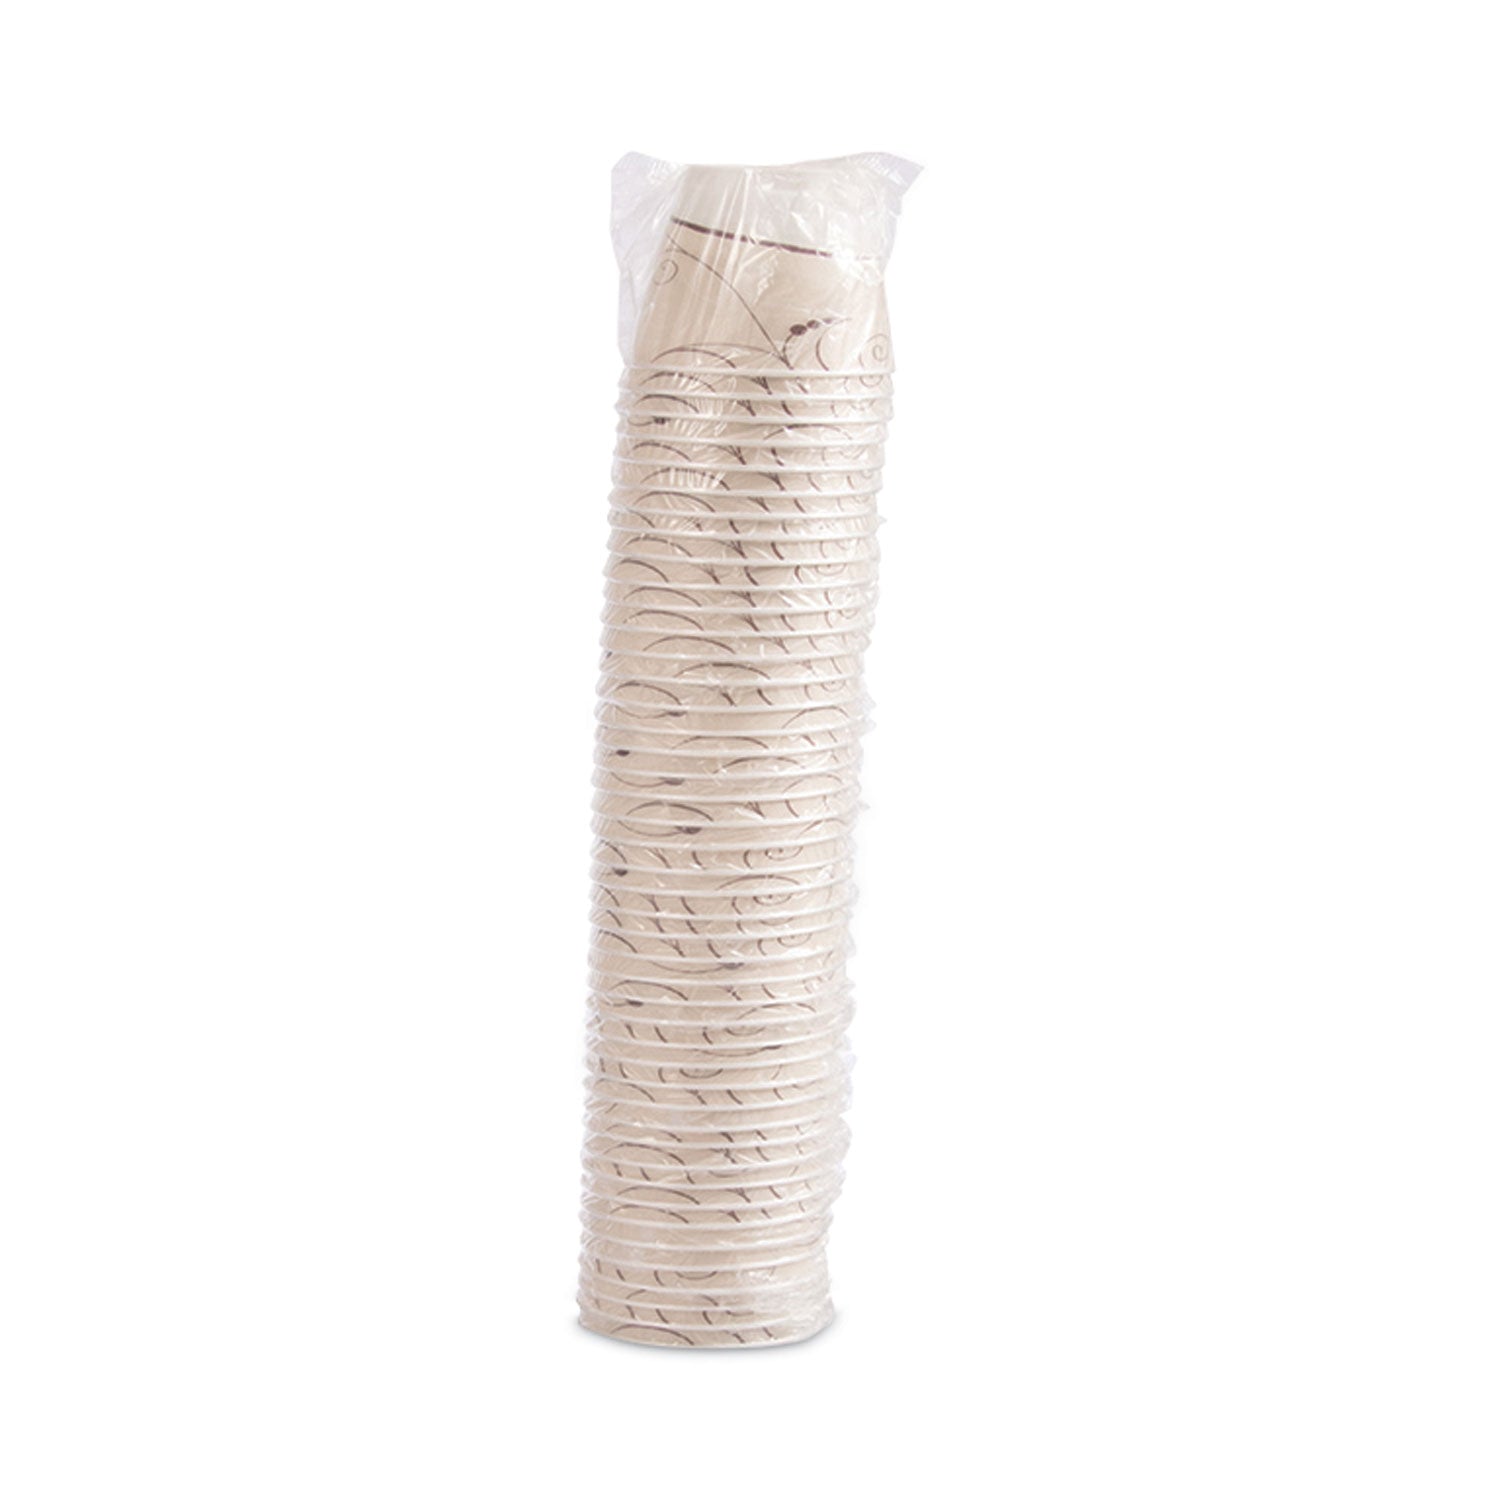 trophy-plus-dual-temperature-insulated-cups-in-symphony-design-9-oz-beige-individual-wrapped-900-carton_sccwx9sym - 3